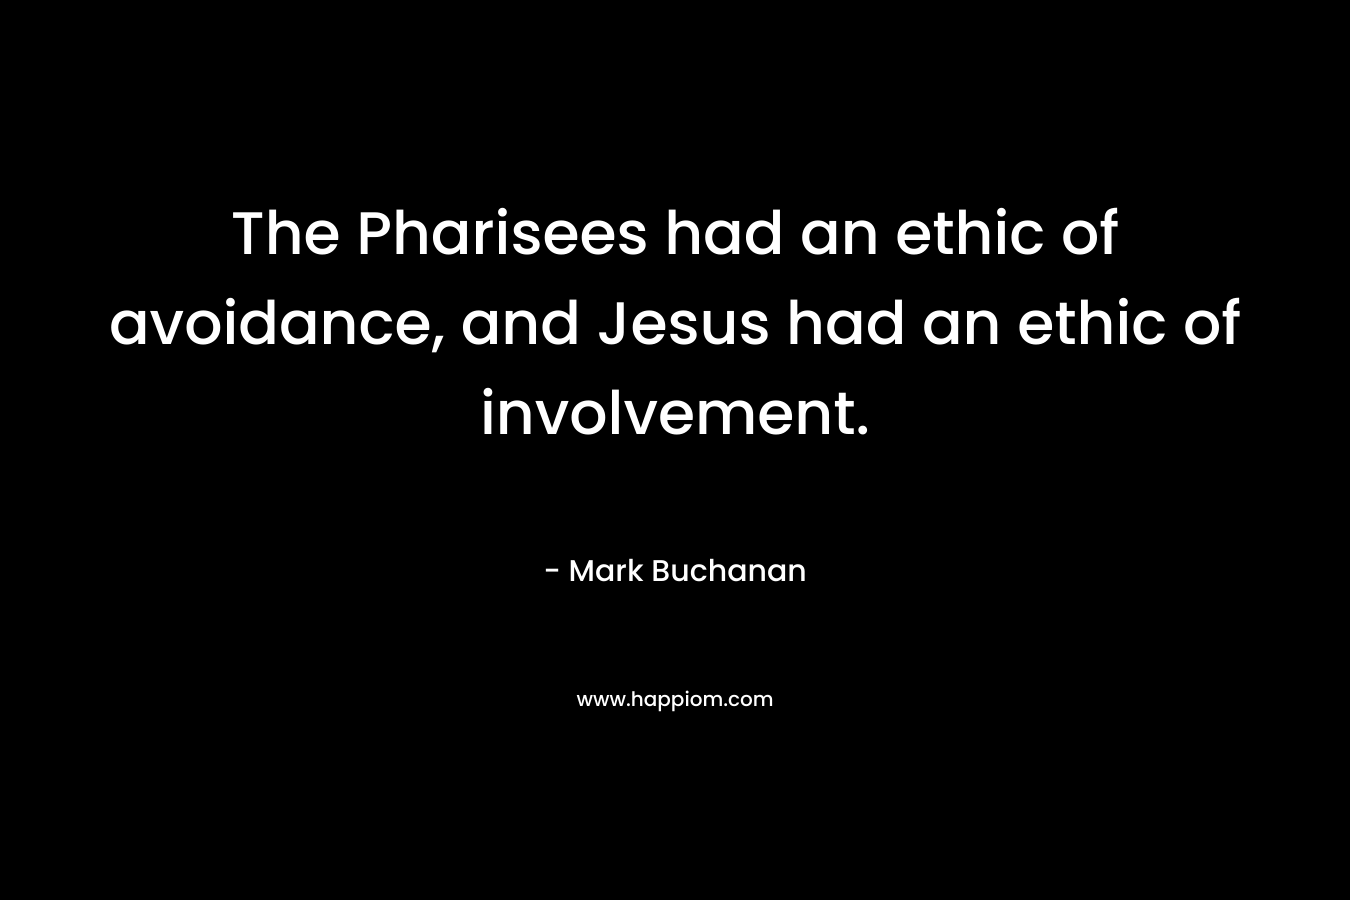 The Pharisees had an ethic of avoidance, and Jesus had an ethic of involvement. – Mark Buchanan